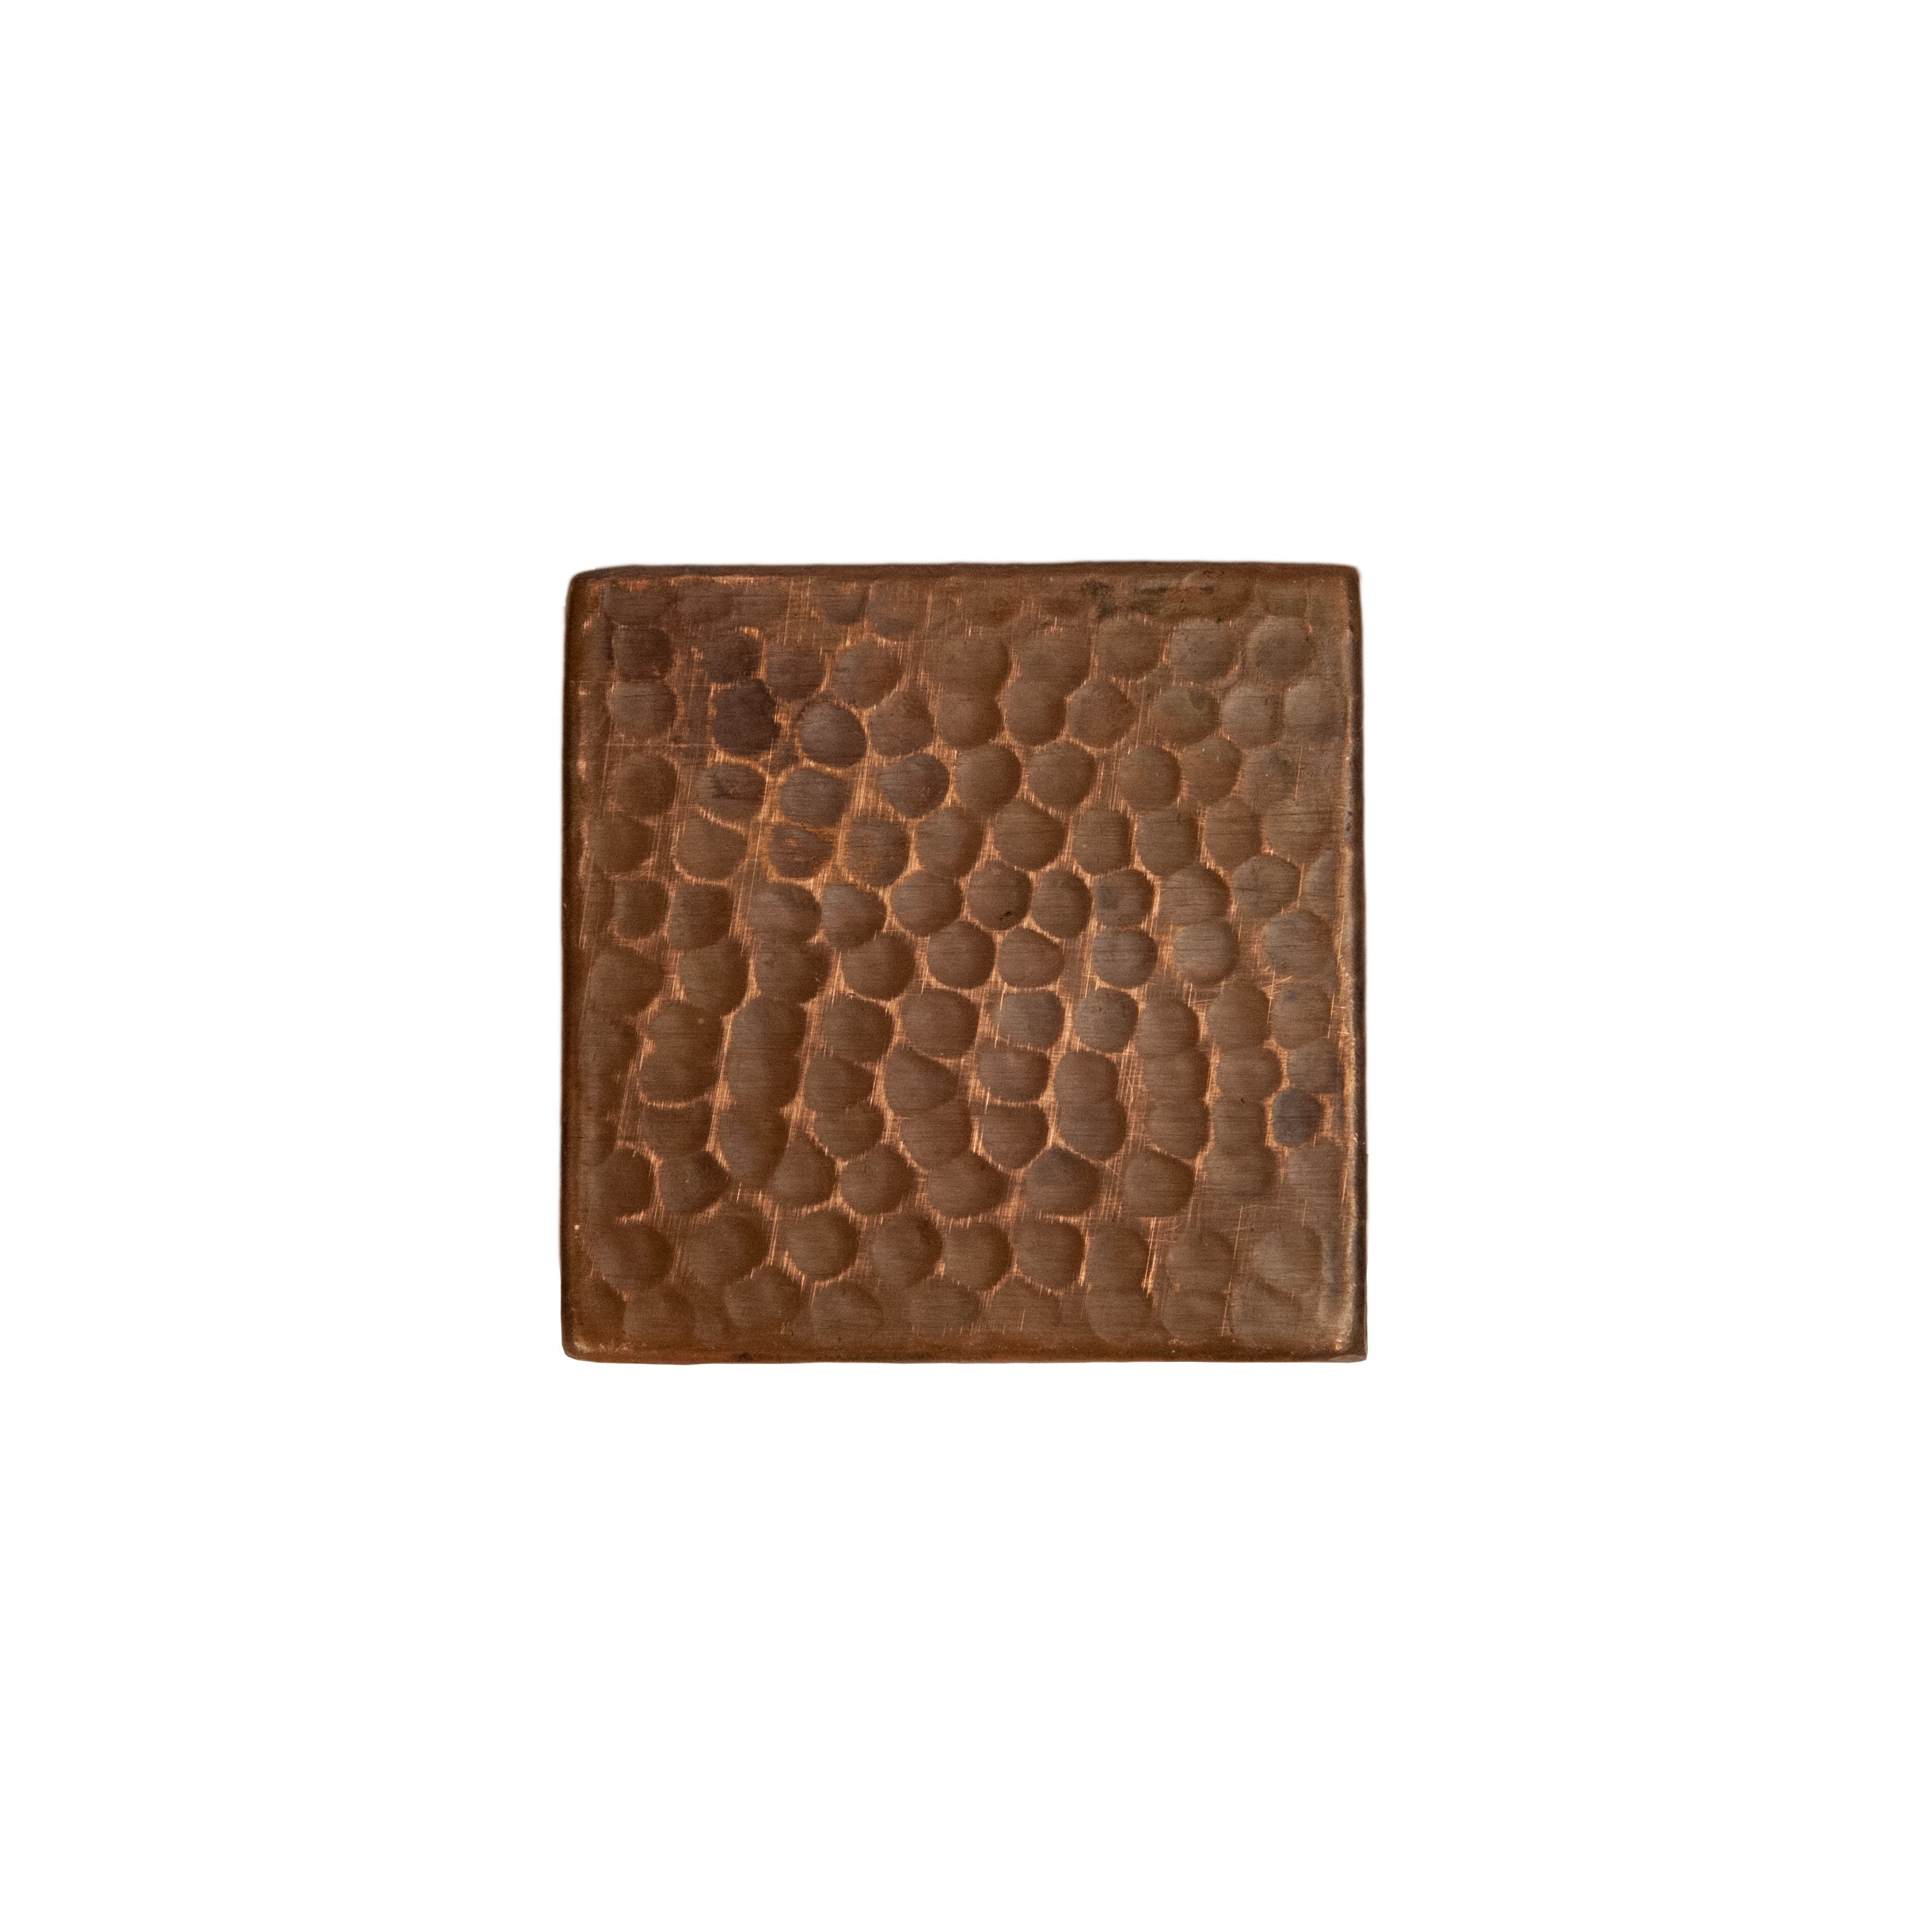 Premier Copper Products 3" x 3" Hammered Copper Tile-DirectSinks